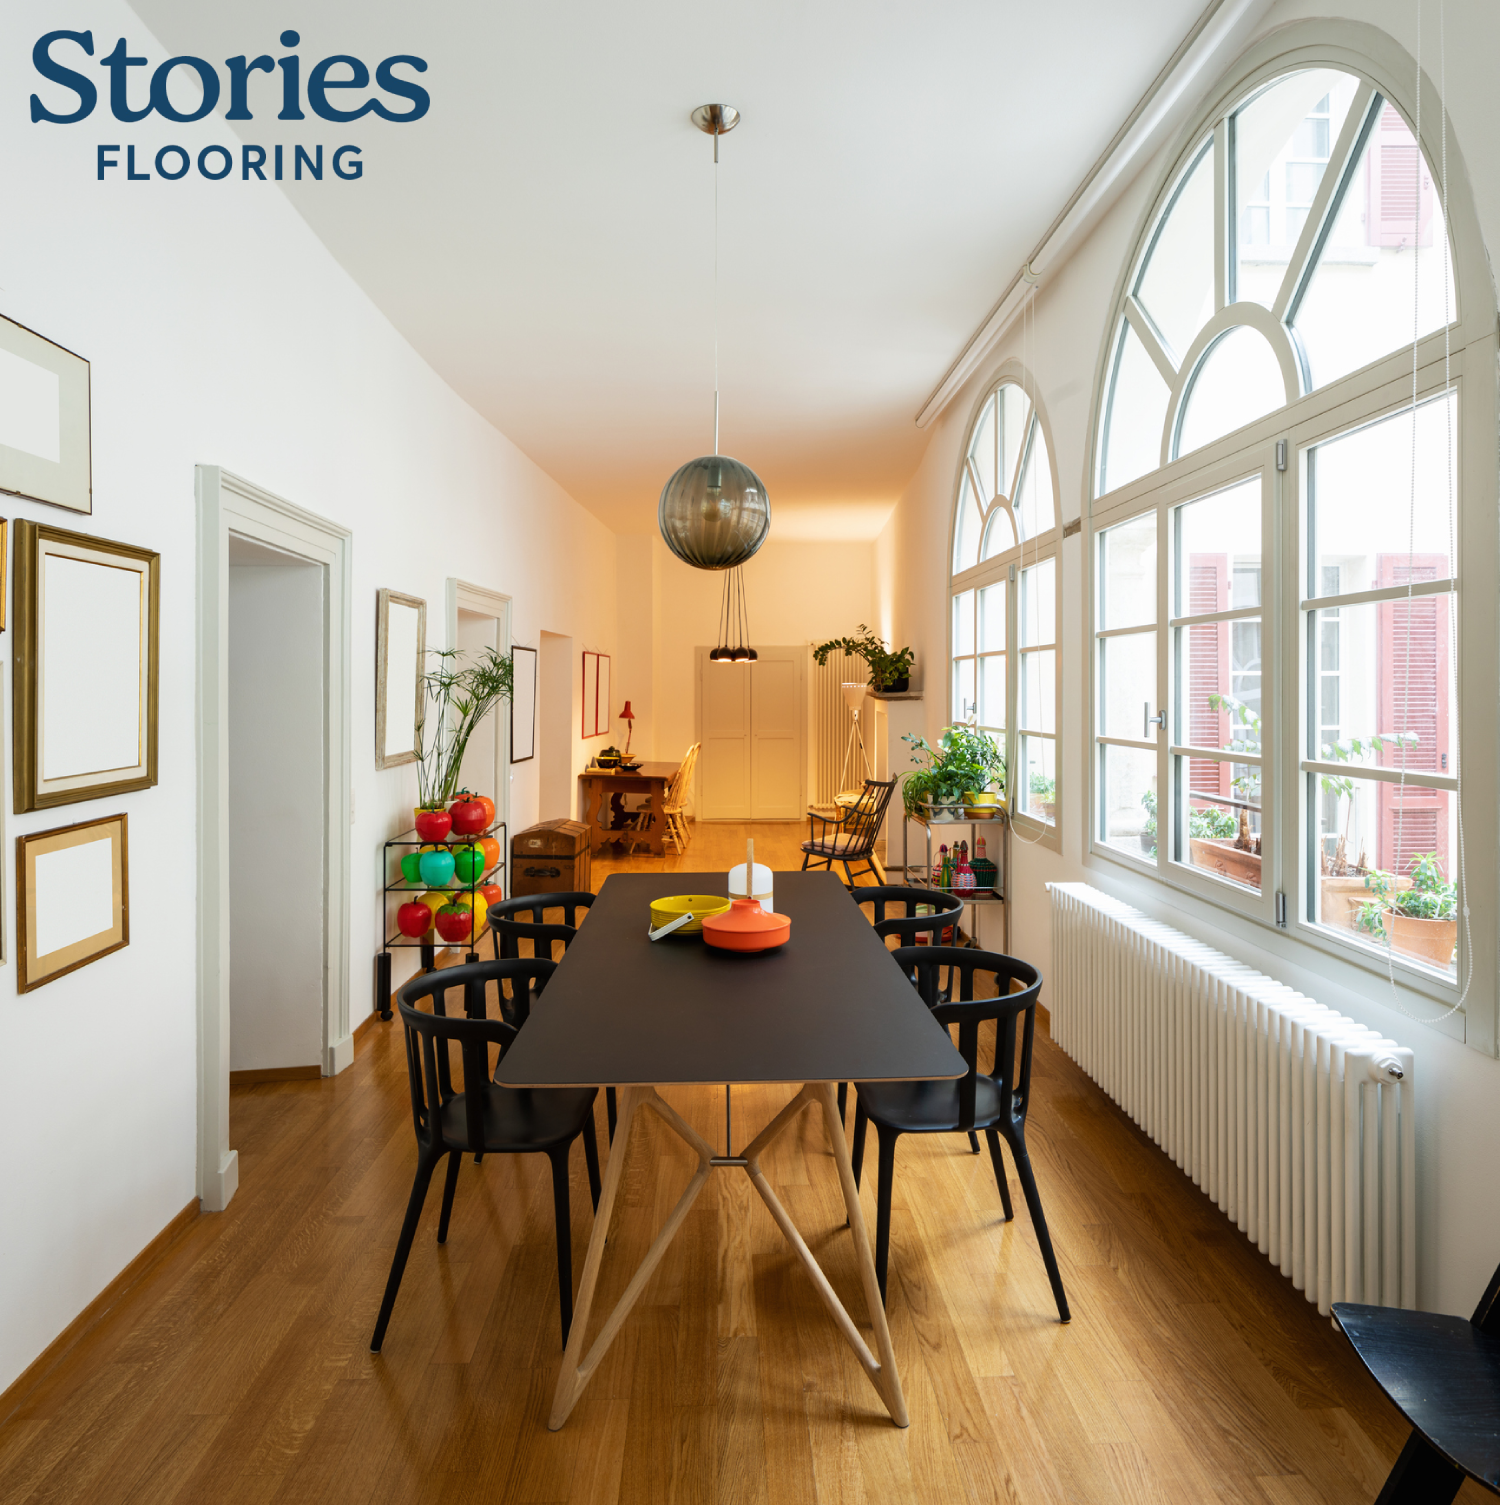 Wood flooring is one of the best type of flooring for your dining room